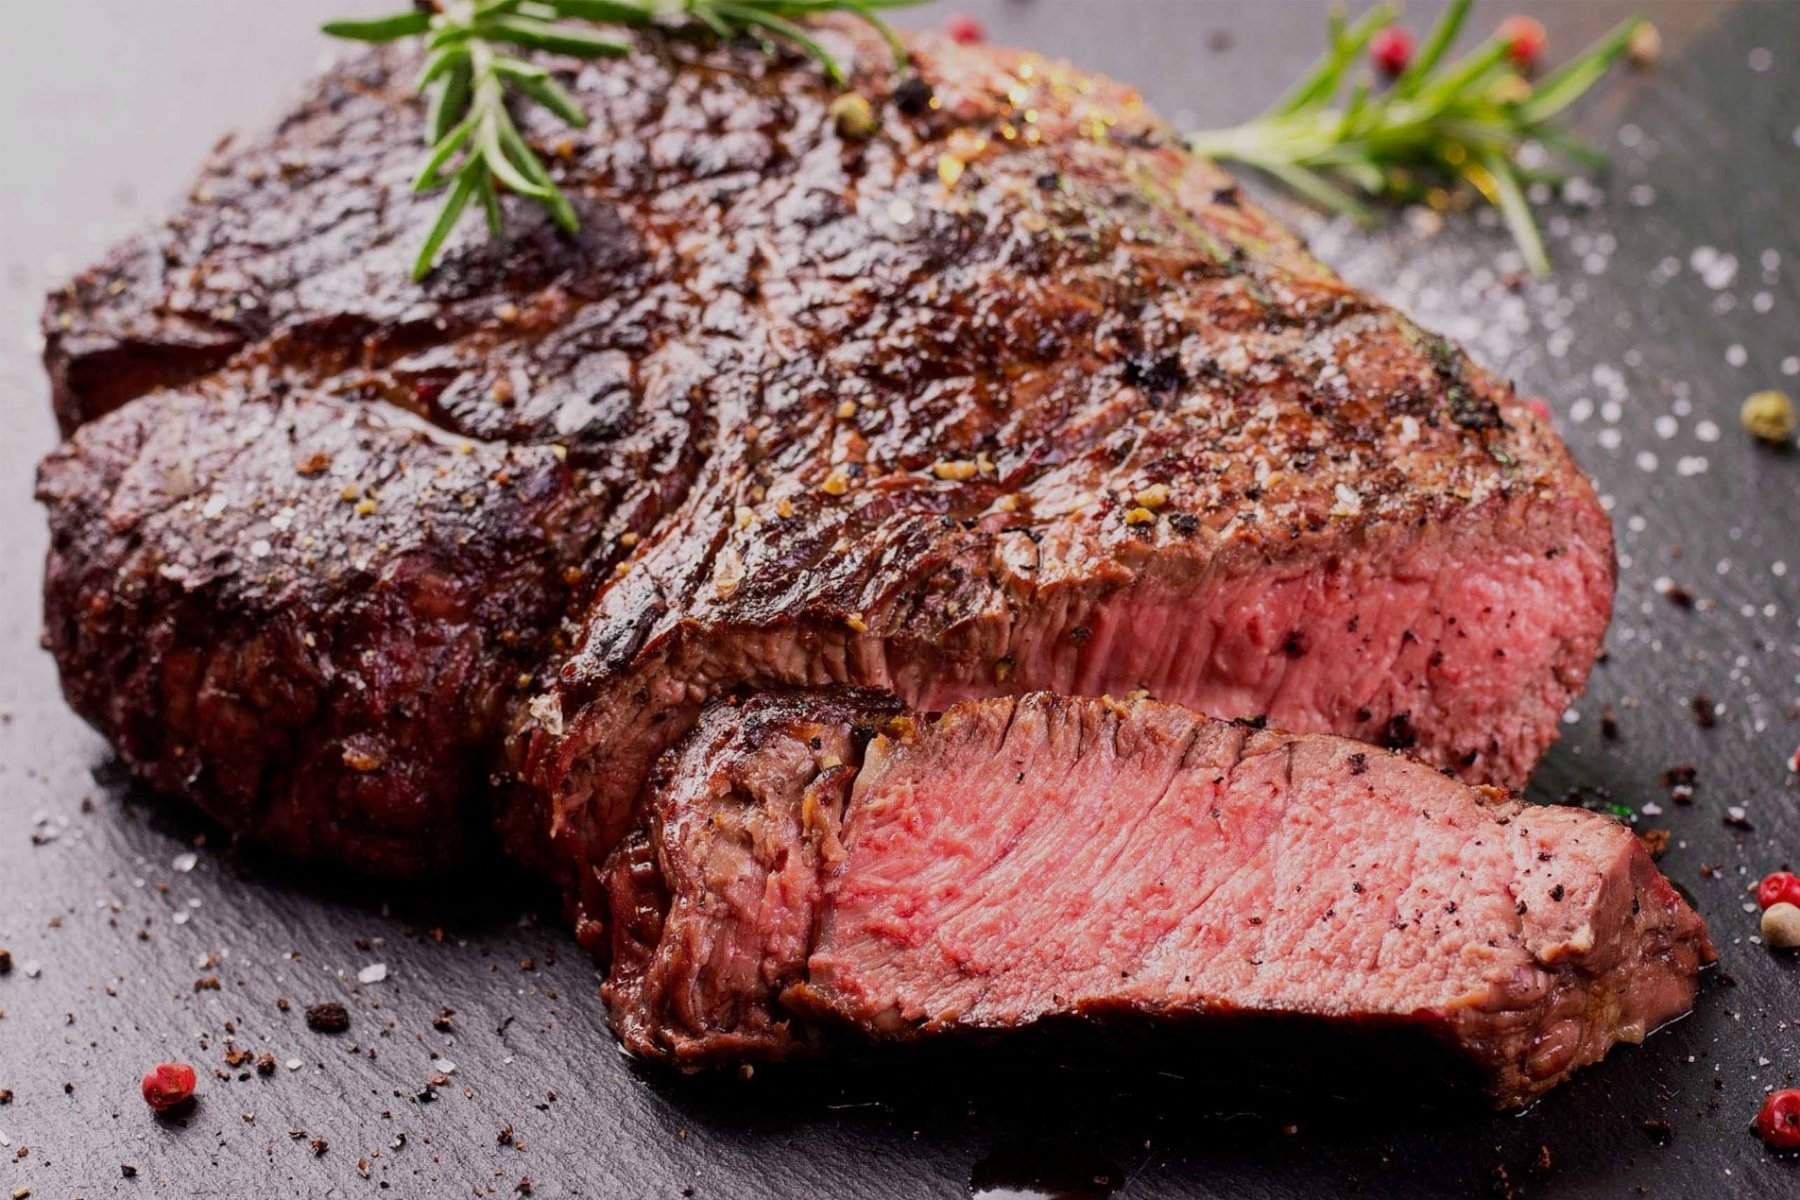 How to Cook Steak to Perfection